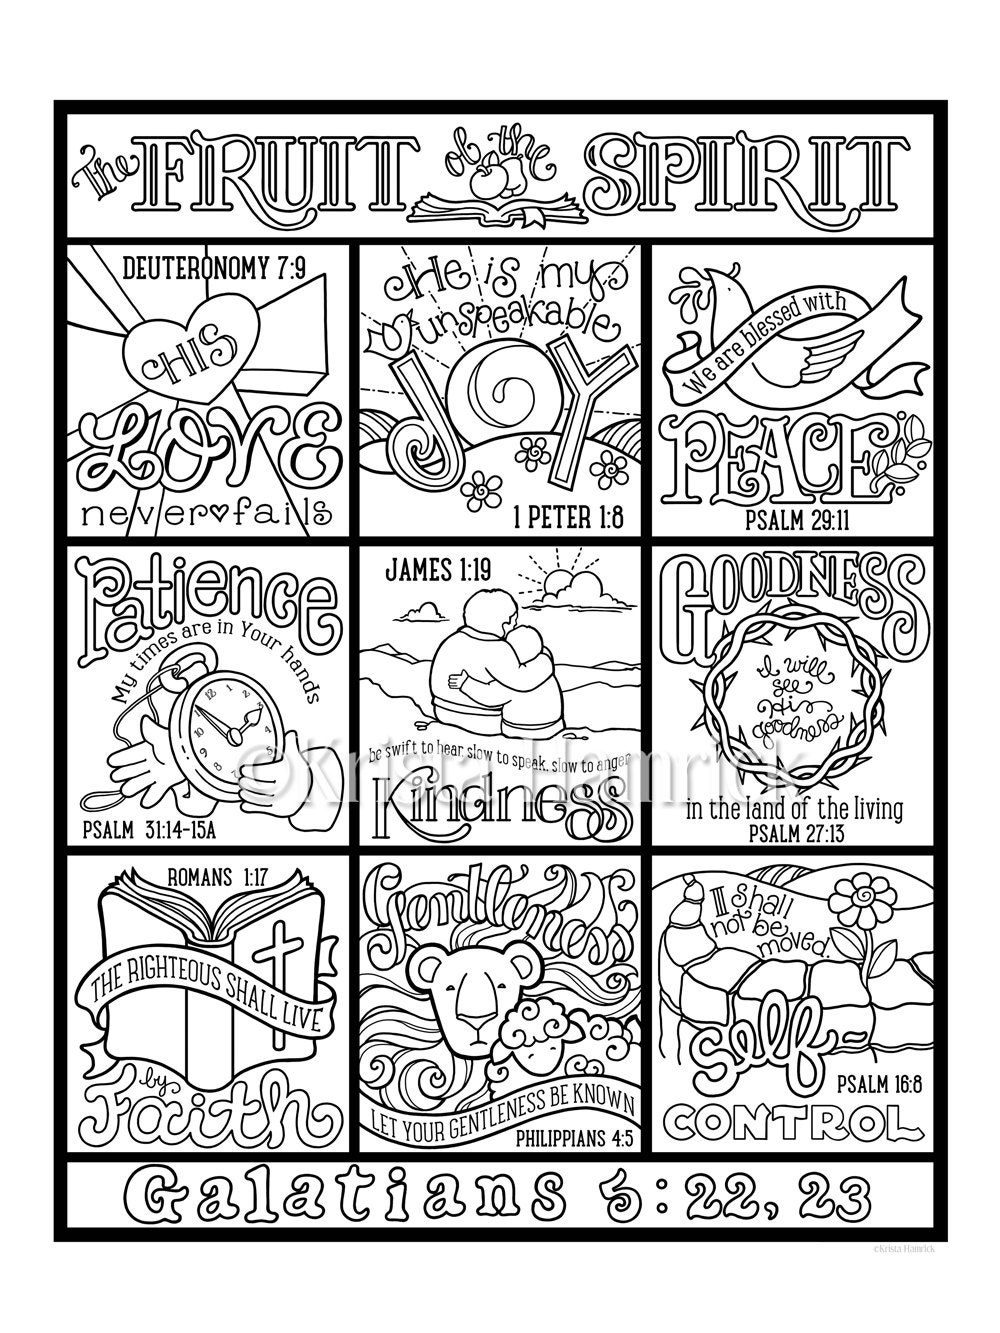 The Fruit of the Spirit coloring page in three sizes: 8.5X11